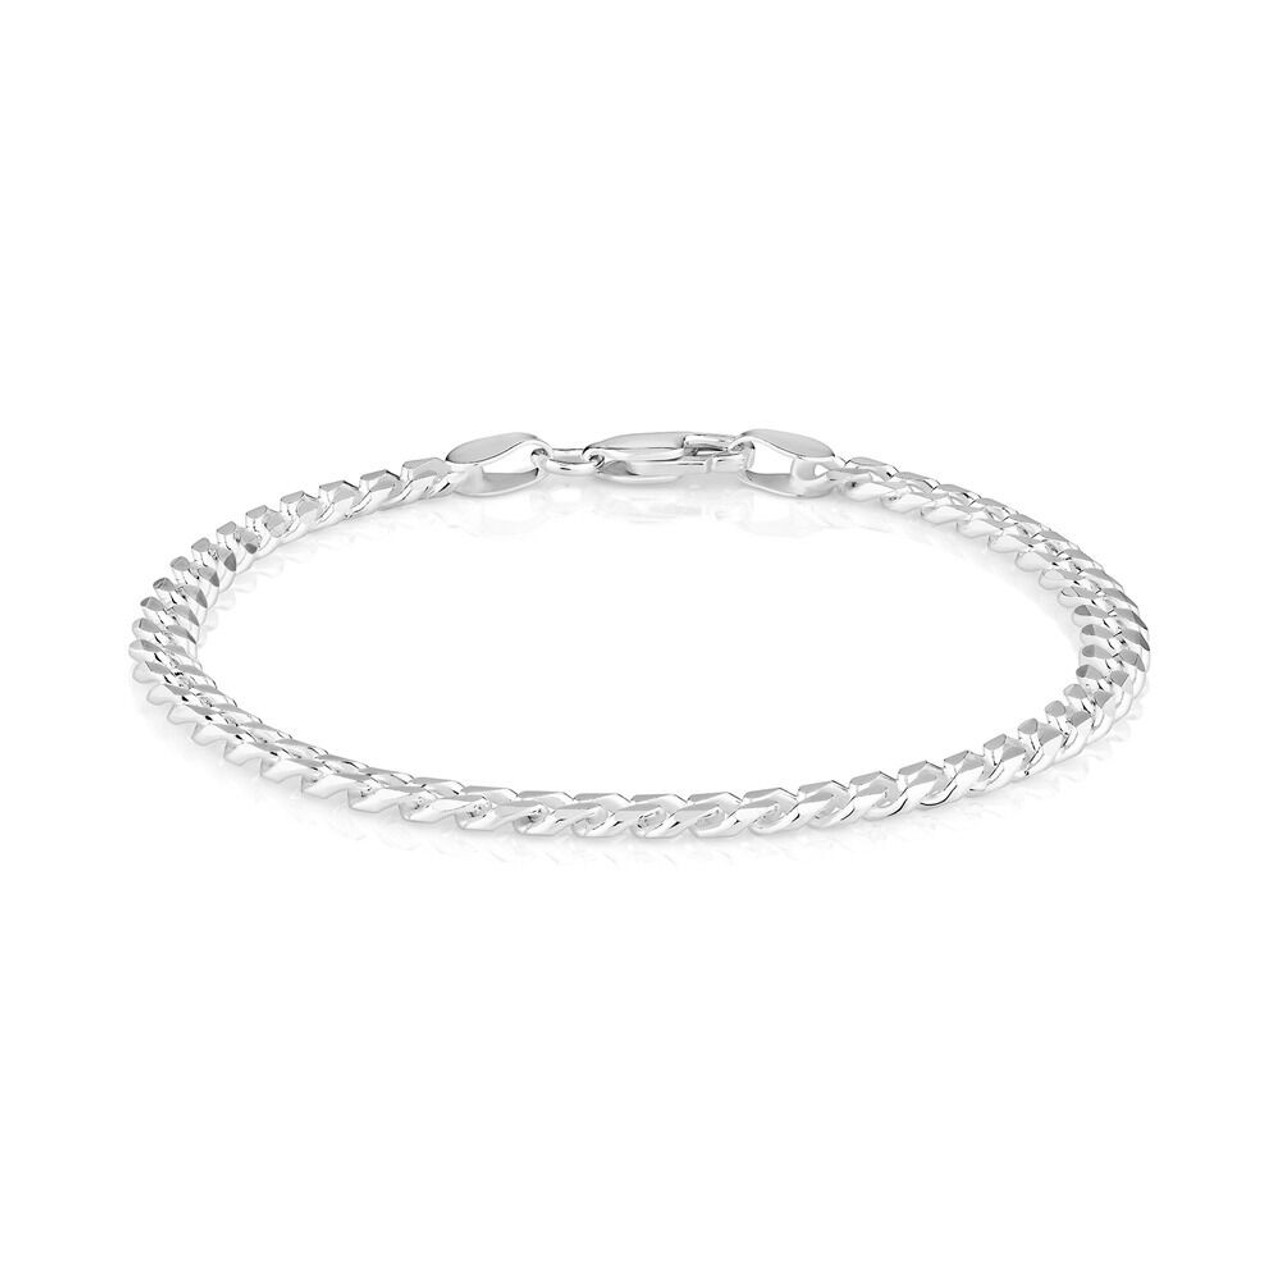 Sterling Silver Curb Bracelet / Chain with Lobster Lock Clasp - 4.5mm / 120